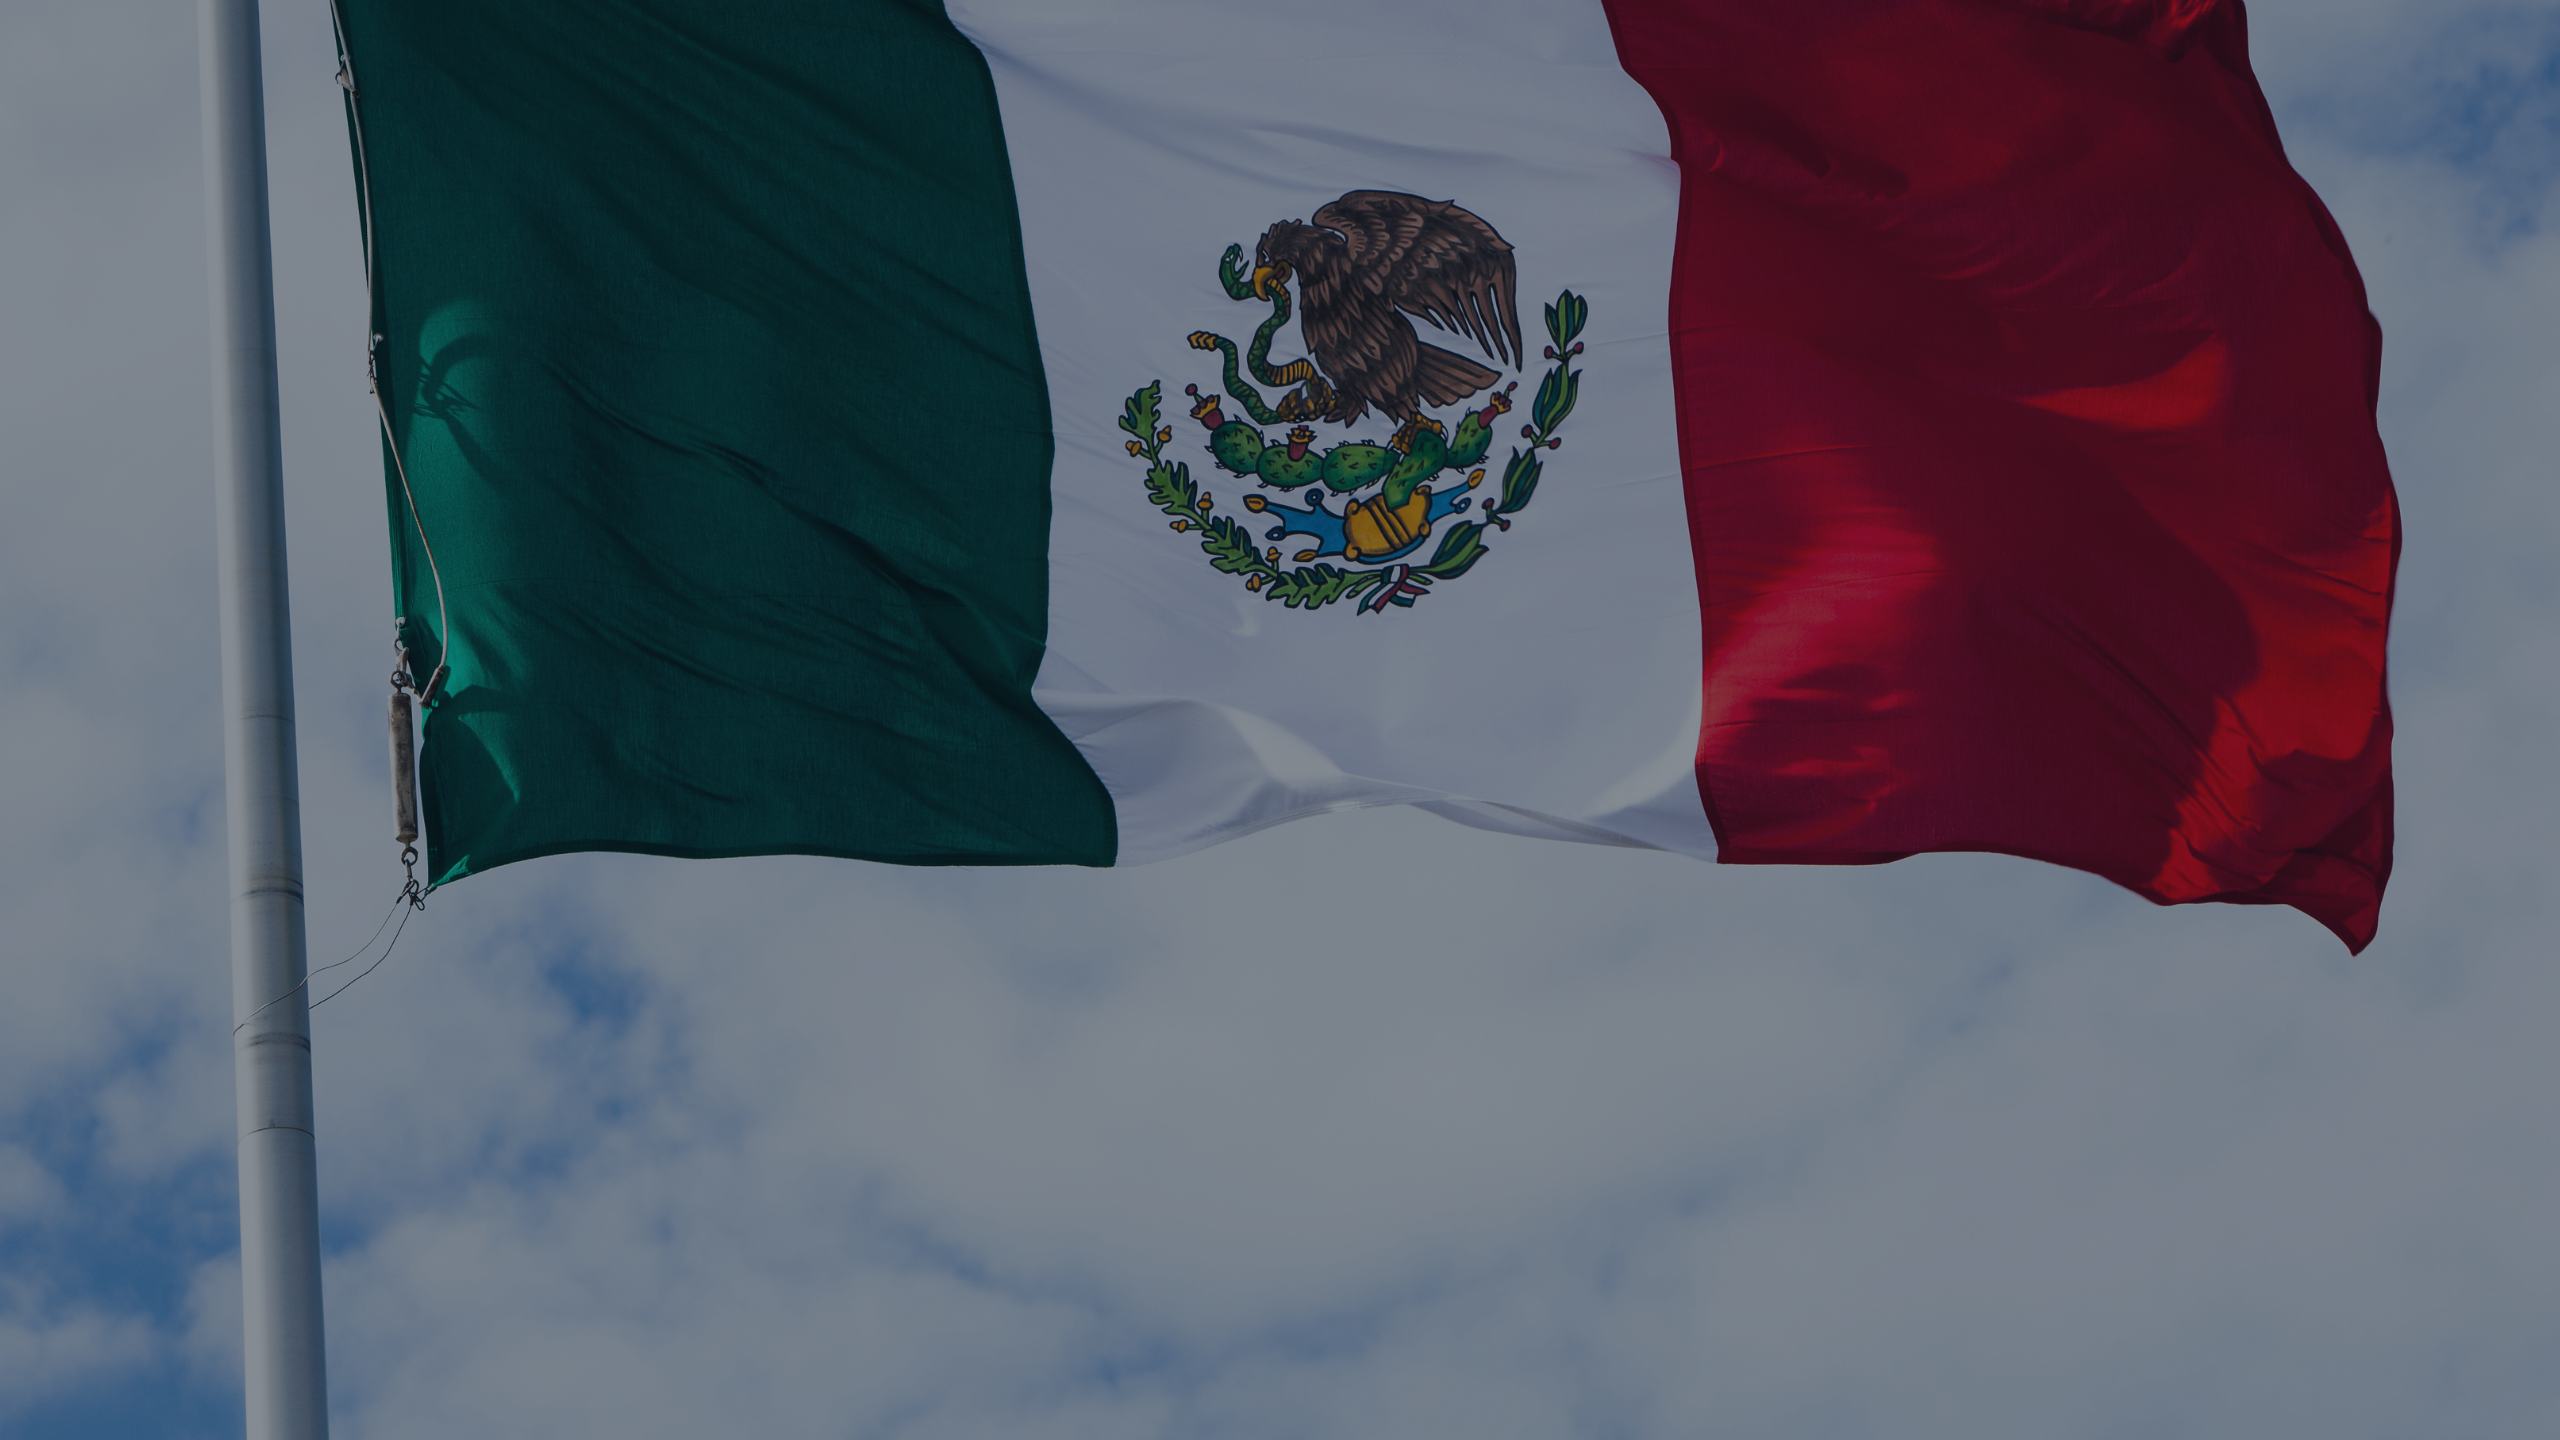 The Flag of Mexico blowing in the wind against a sky background depicts import into Mexico.